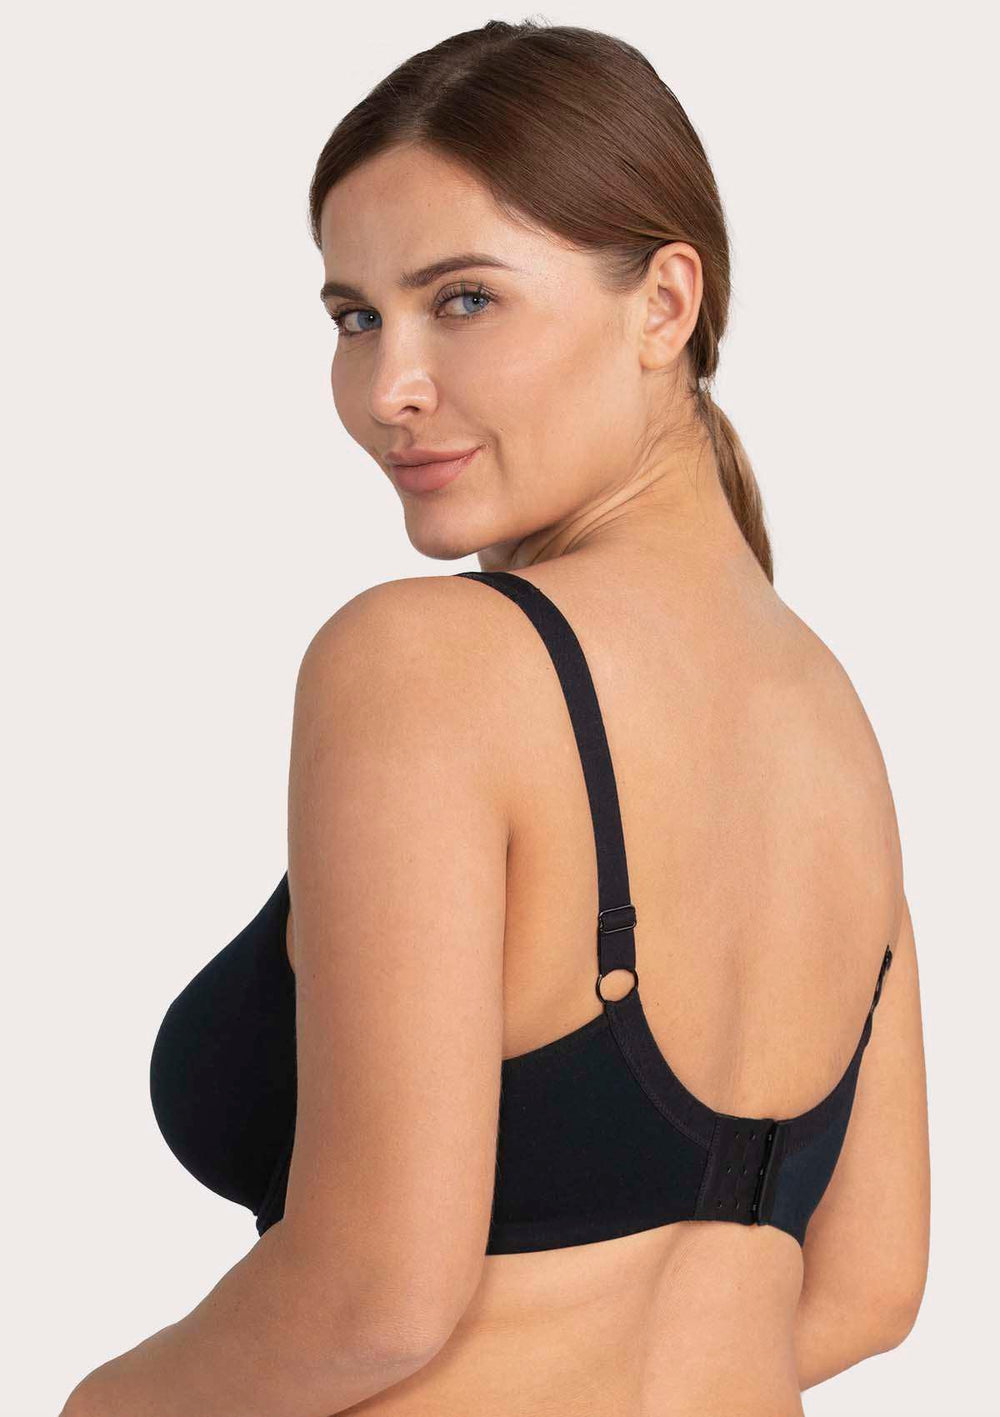 Buy HSIA Minimizer Bras for Women Full Coverage,Unlined Non Padded